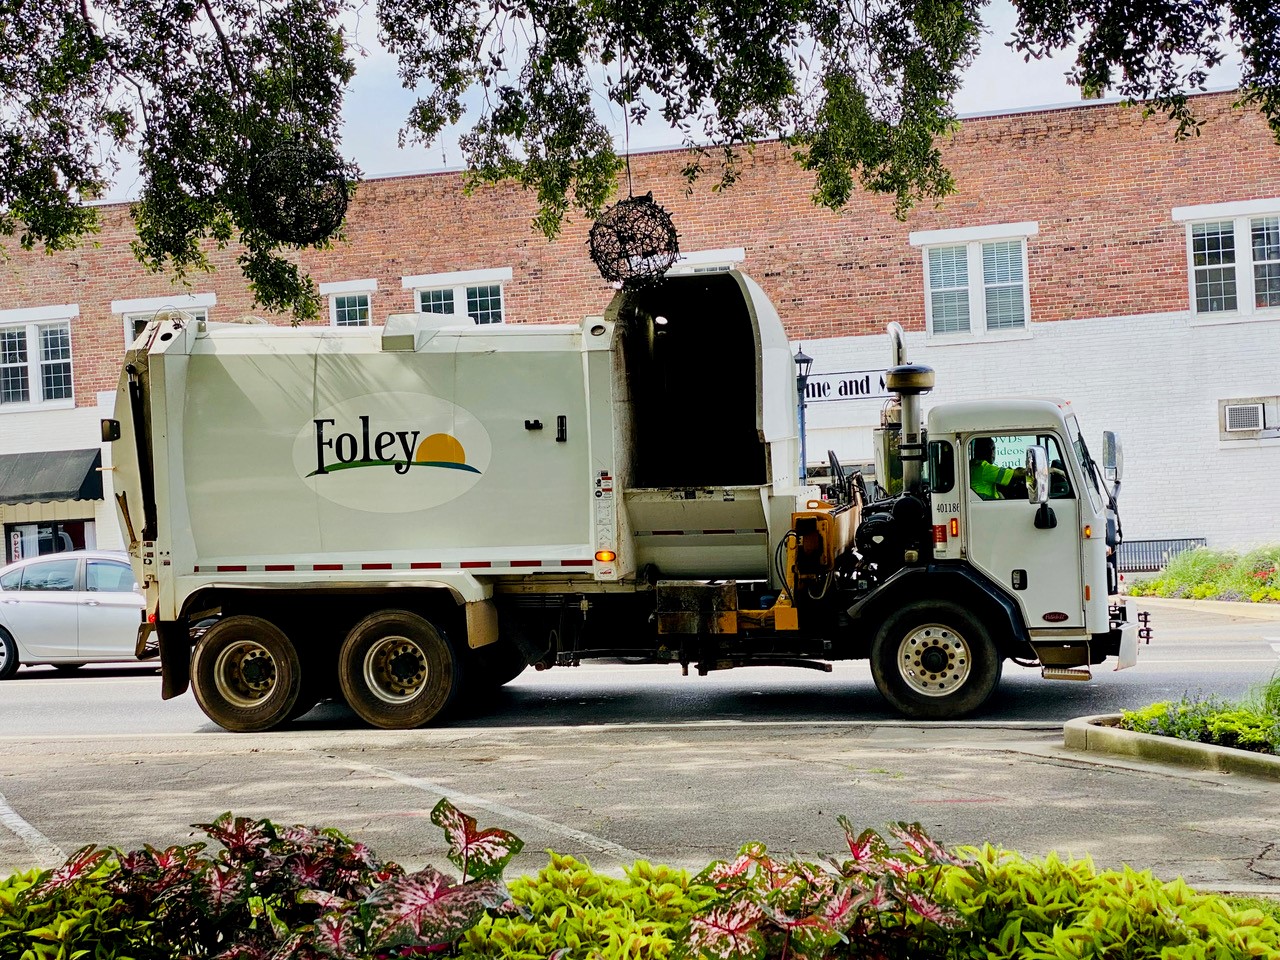 FOLEY ORDERS TWO MORE GARBAGE TRUCKS